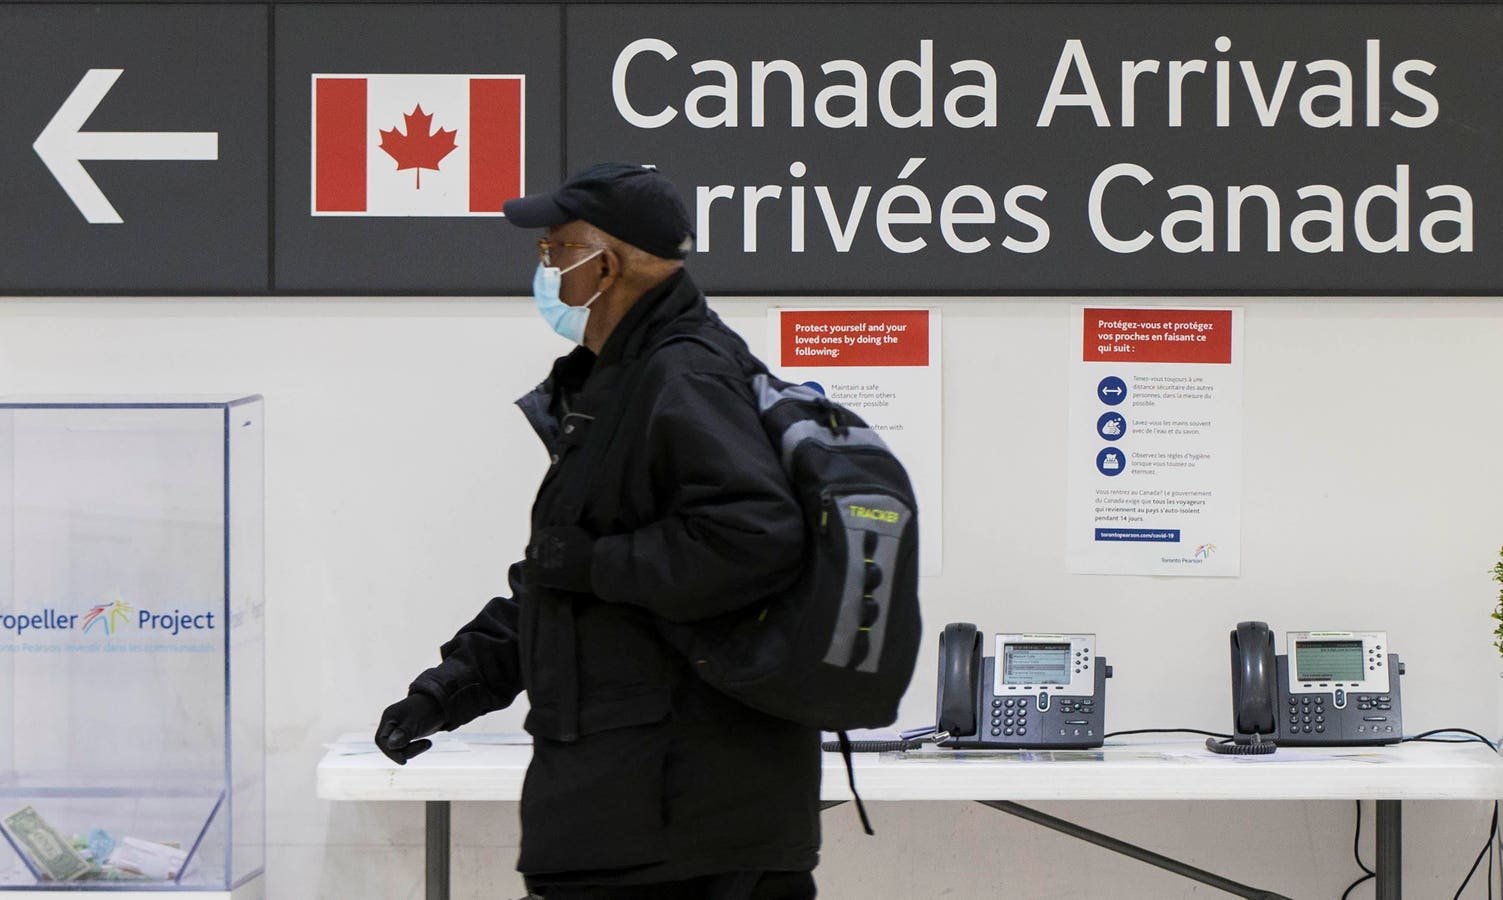 Over A Dozen Flights From The U.S. Brought Covid-Infected Passengers To Canada In A Single Week